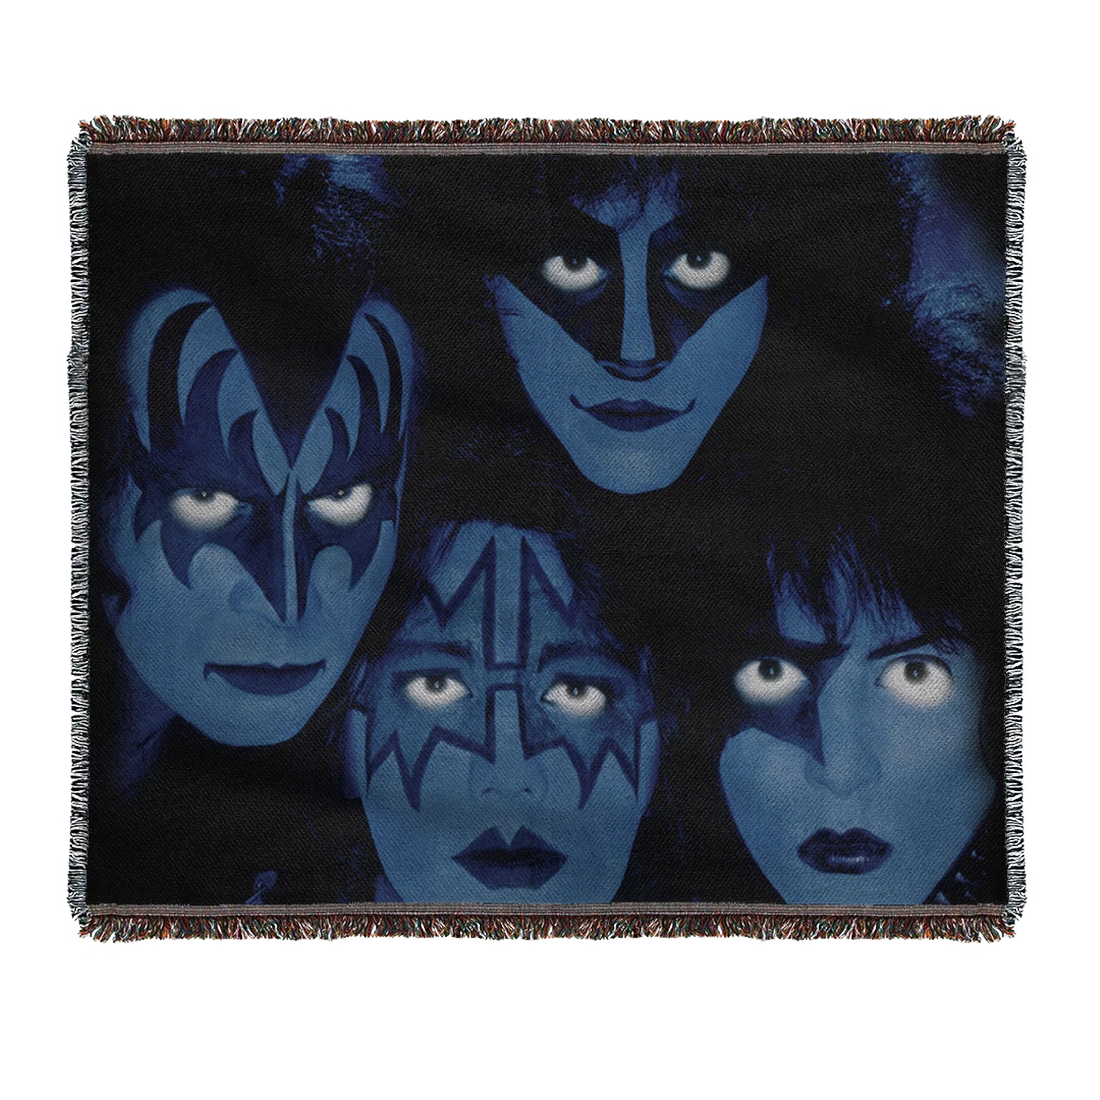 Kiss - Creatures of the Night Woven Blanket